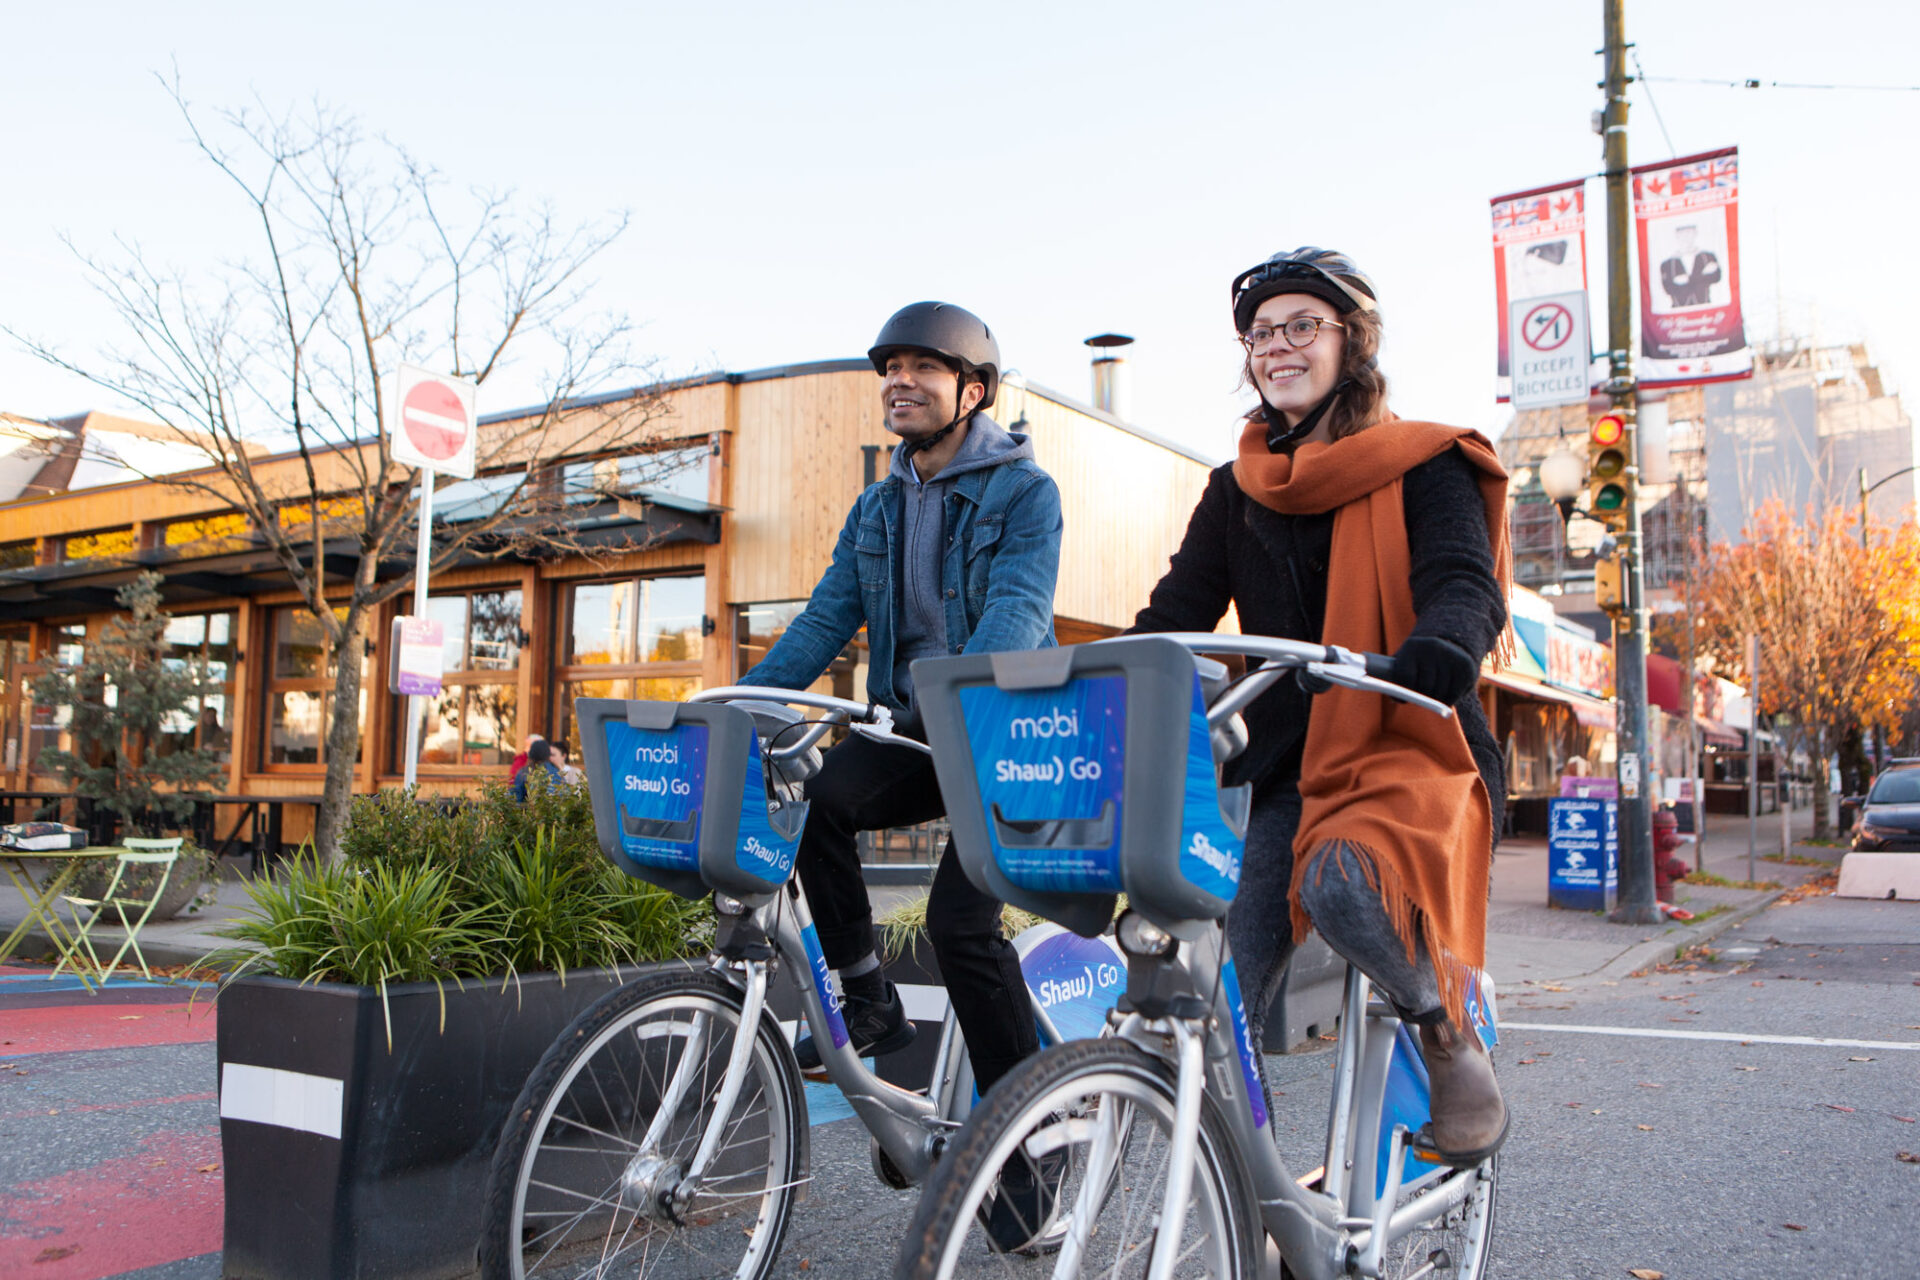 A man and woman ride bike share bicycles next to a coffee shop on Main Street, Vancouver.